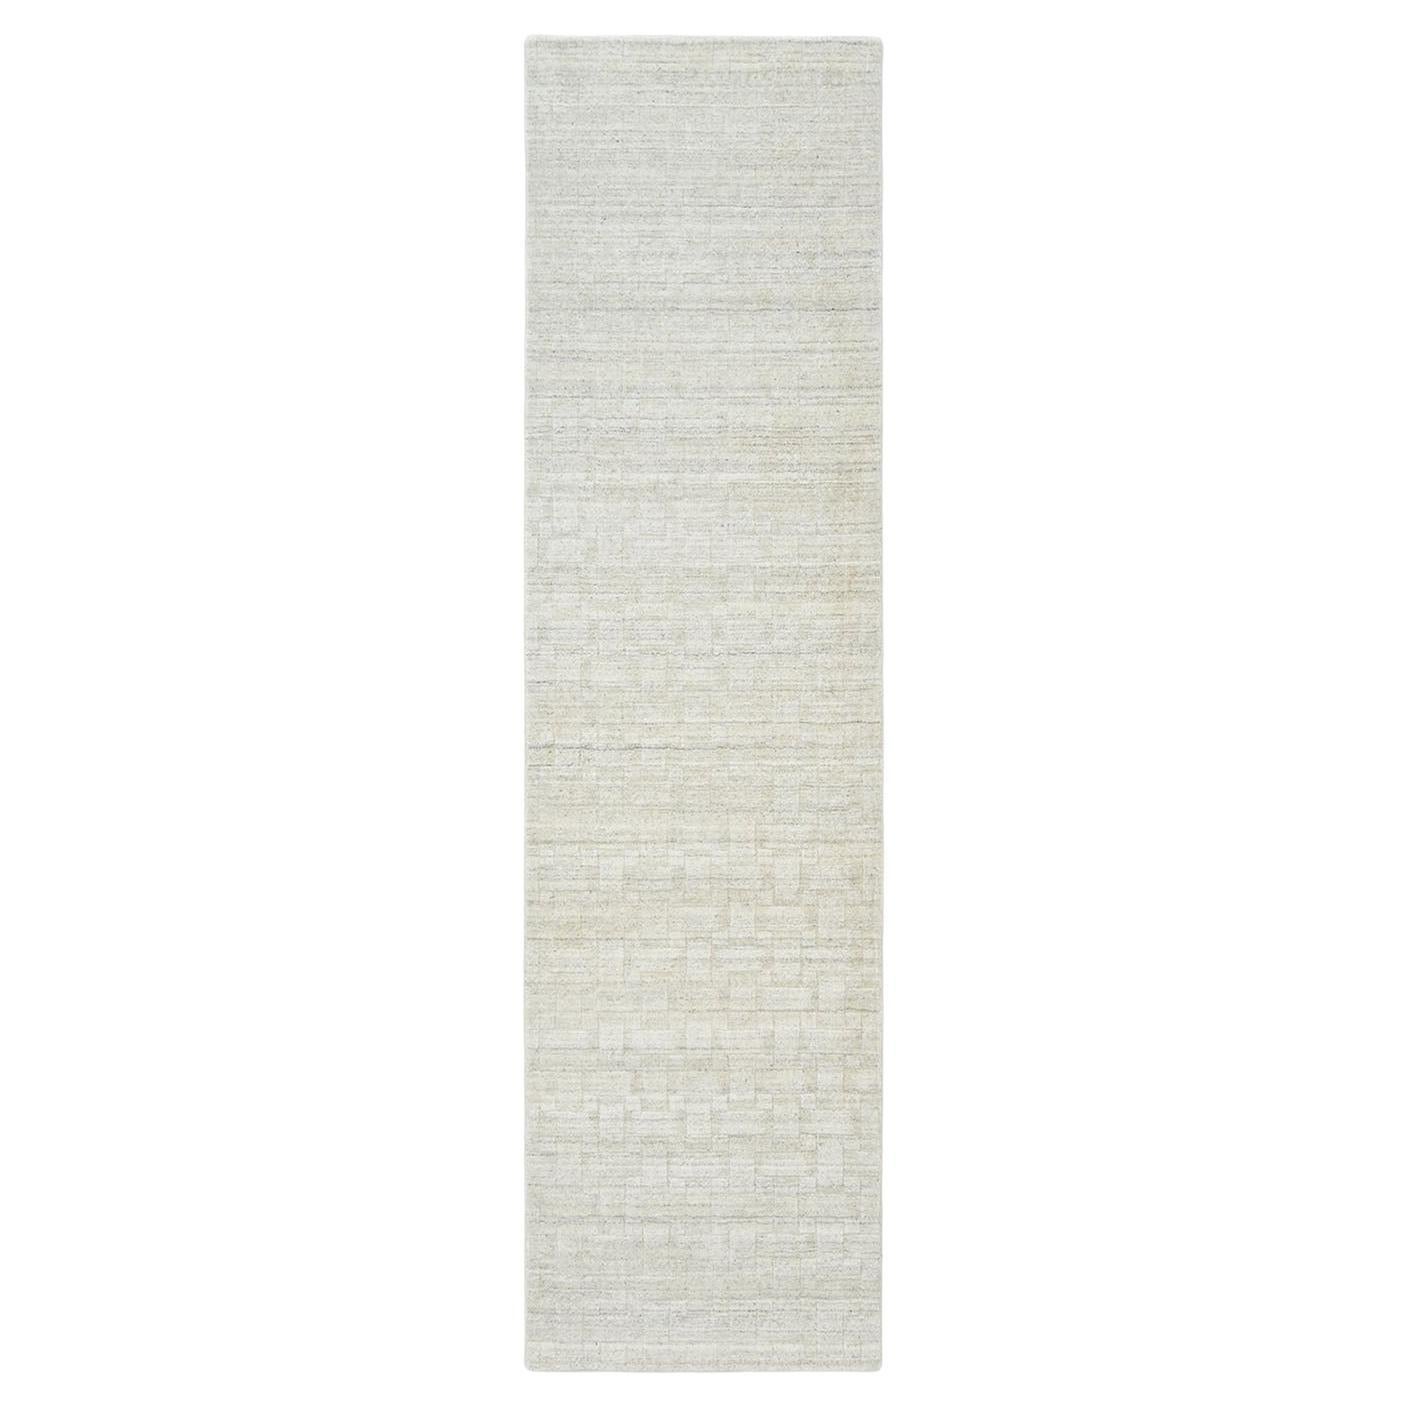 Solo Rugs Peyton Contemporary Geometric Handmade Runner Ivory For Sale